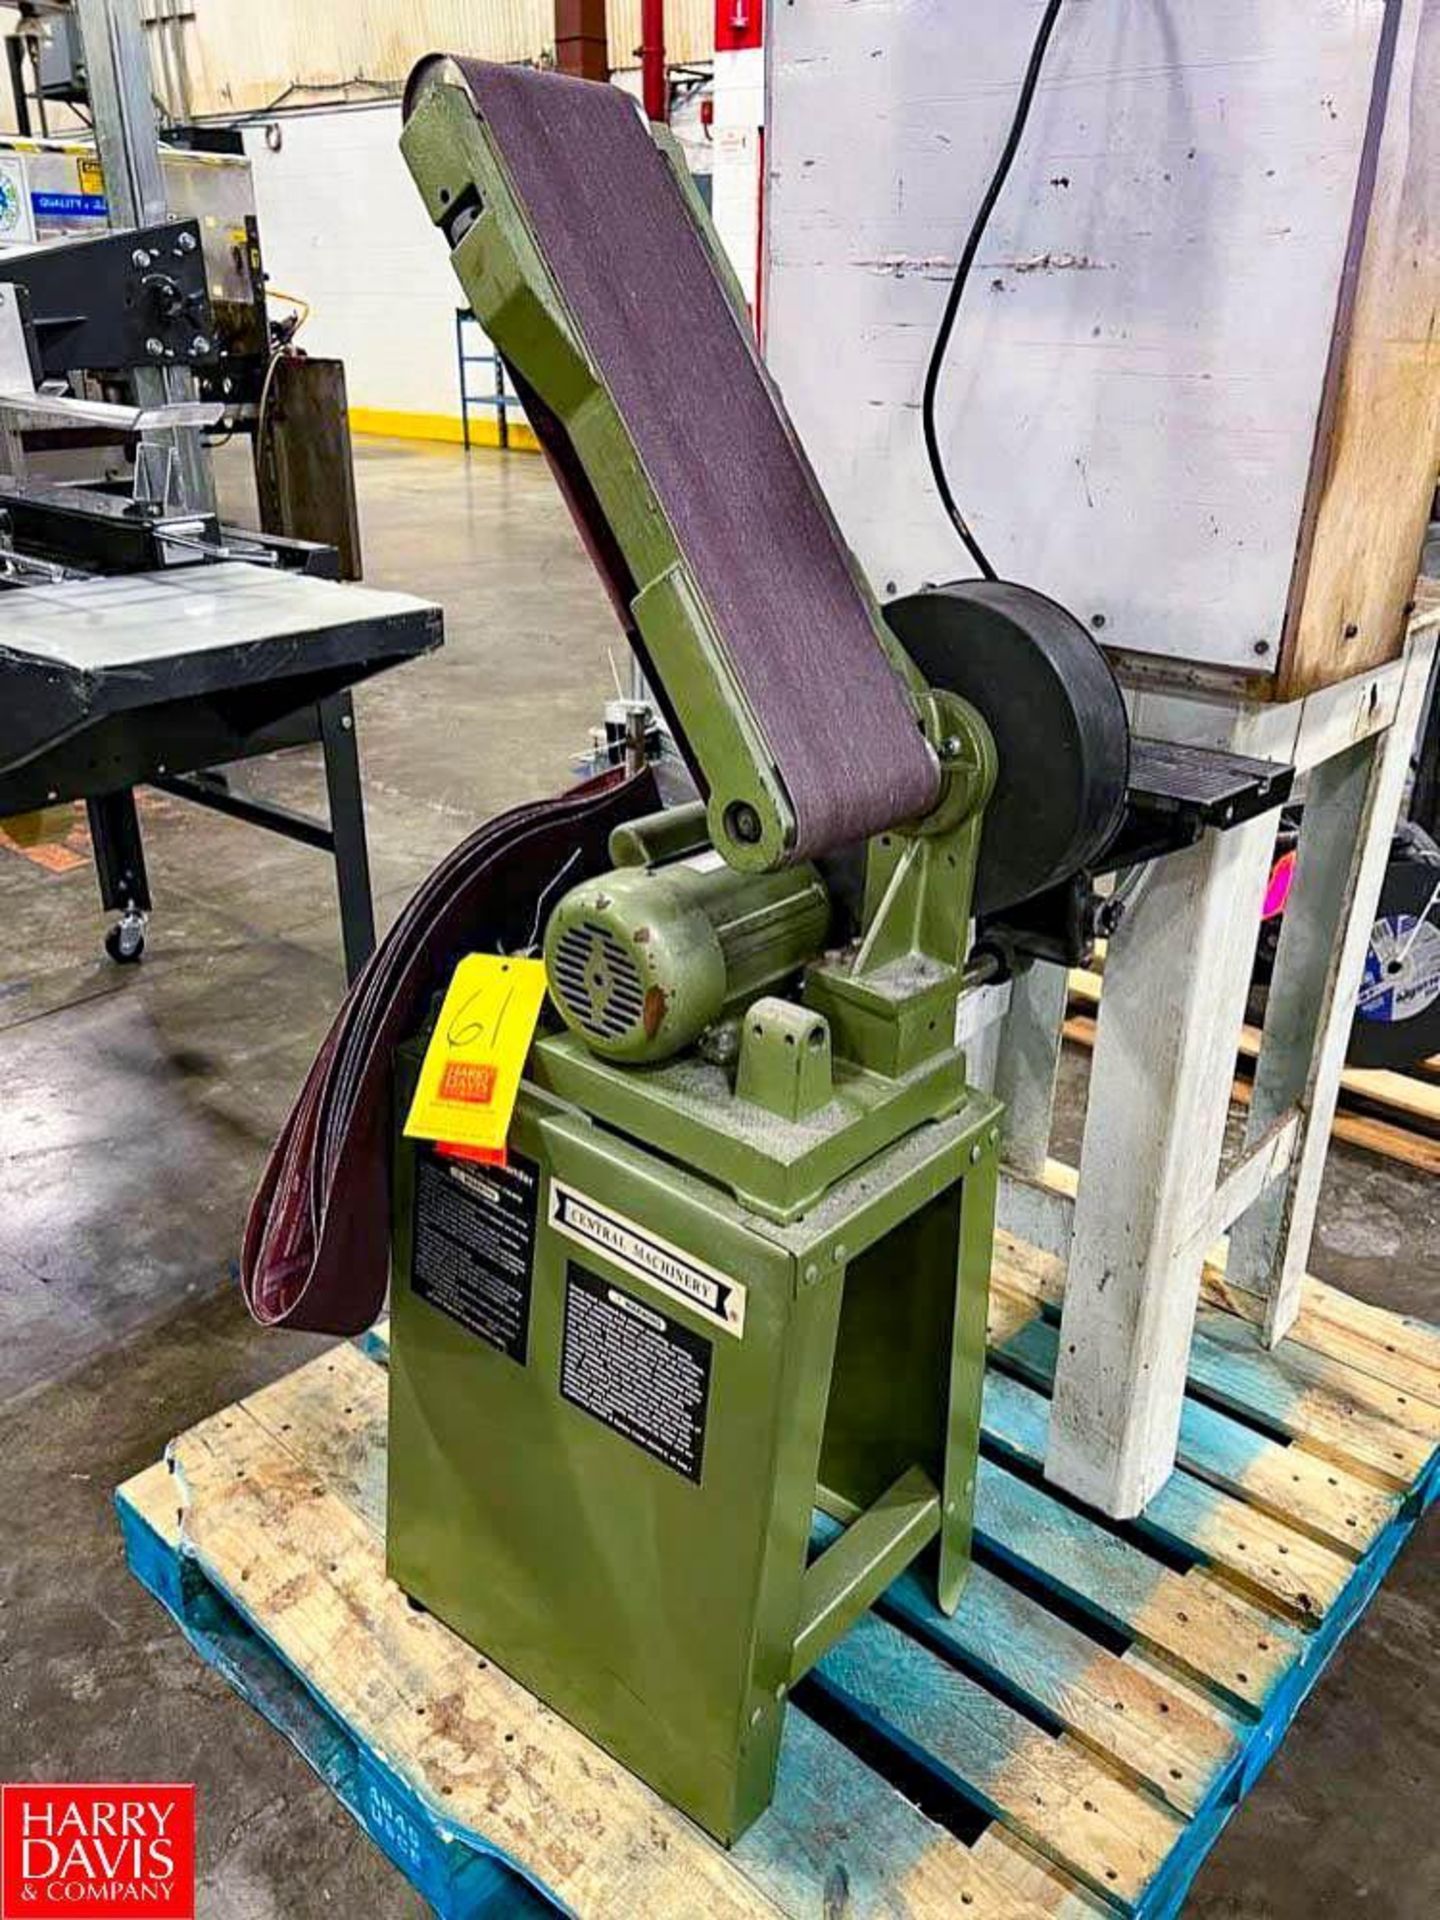 Central Machinery Belt/Disc Sander with (5) NEW Belts - Rigging Fee: $75